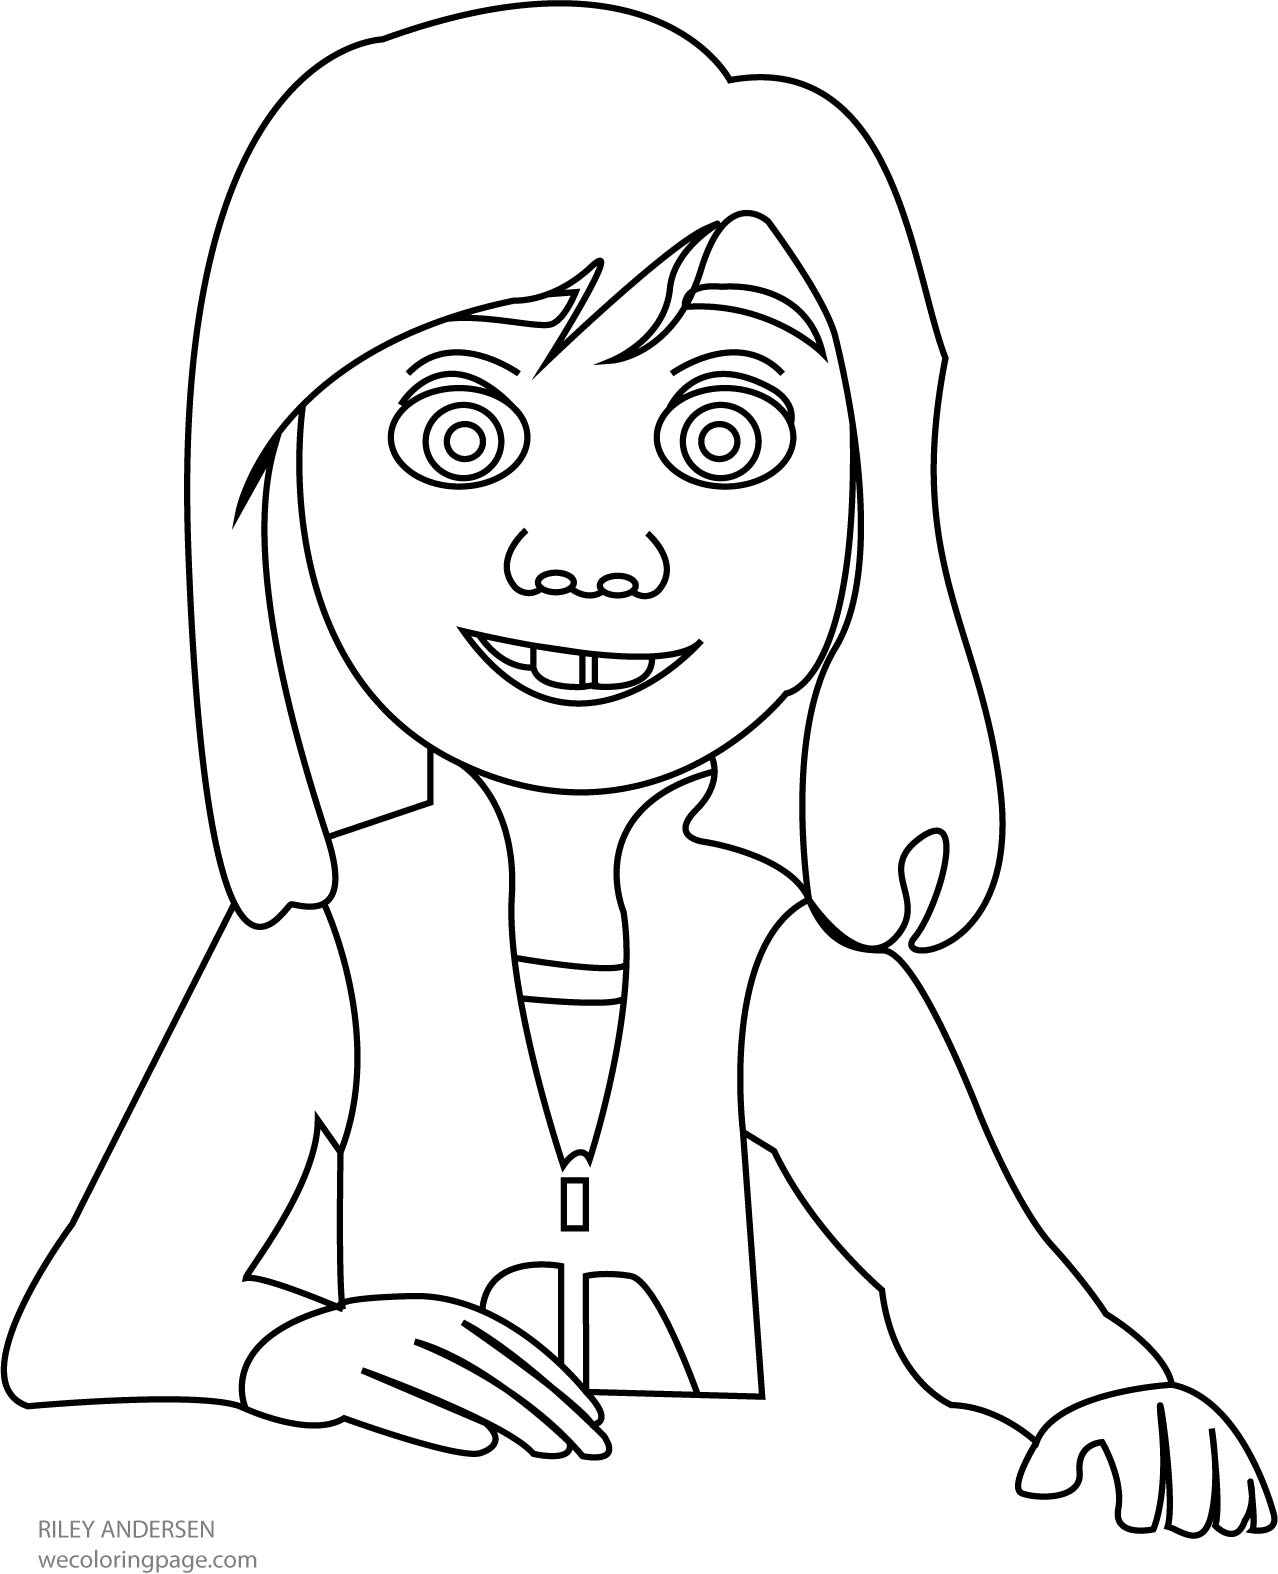 Riley Andersen Inside Out Coloring Page - Wecoloringpage.com